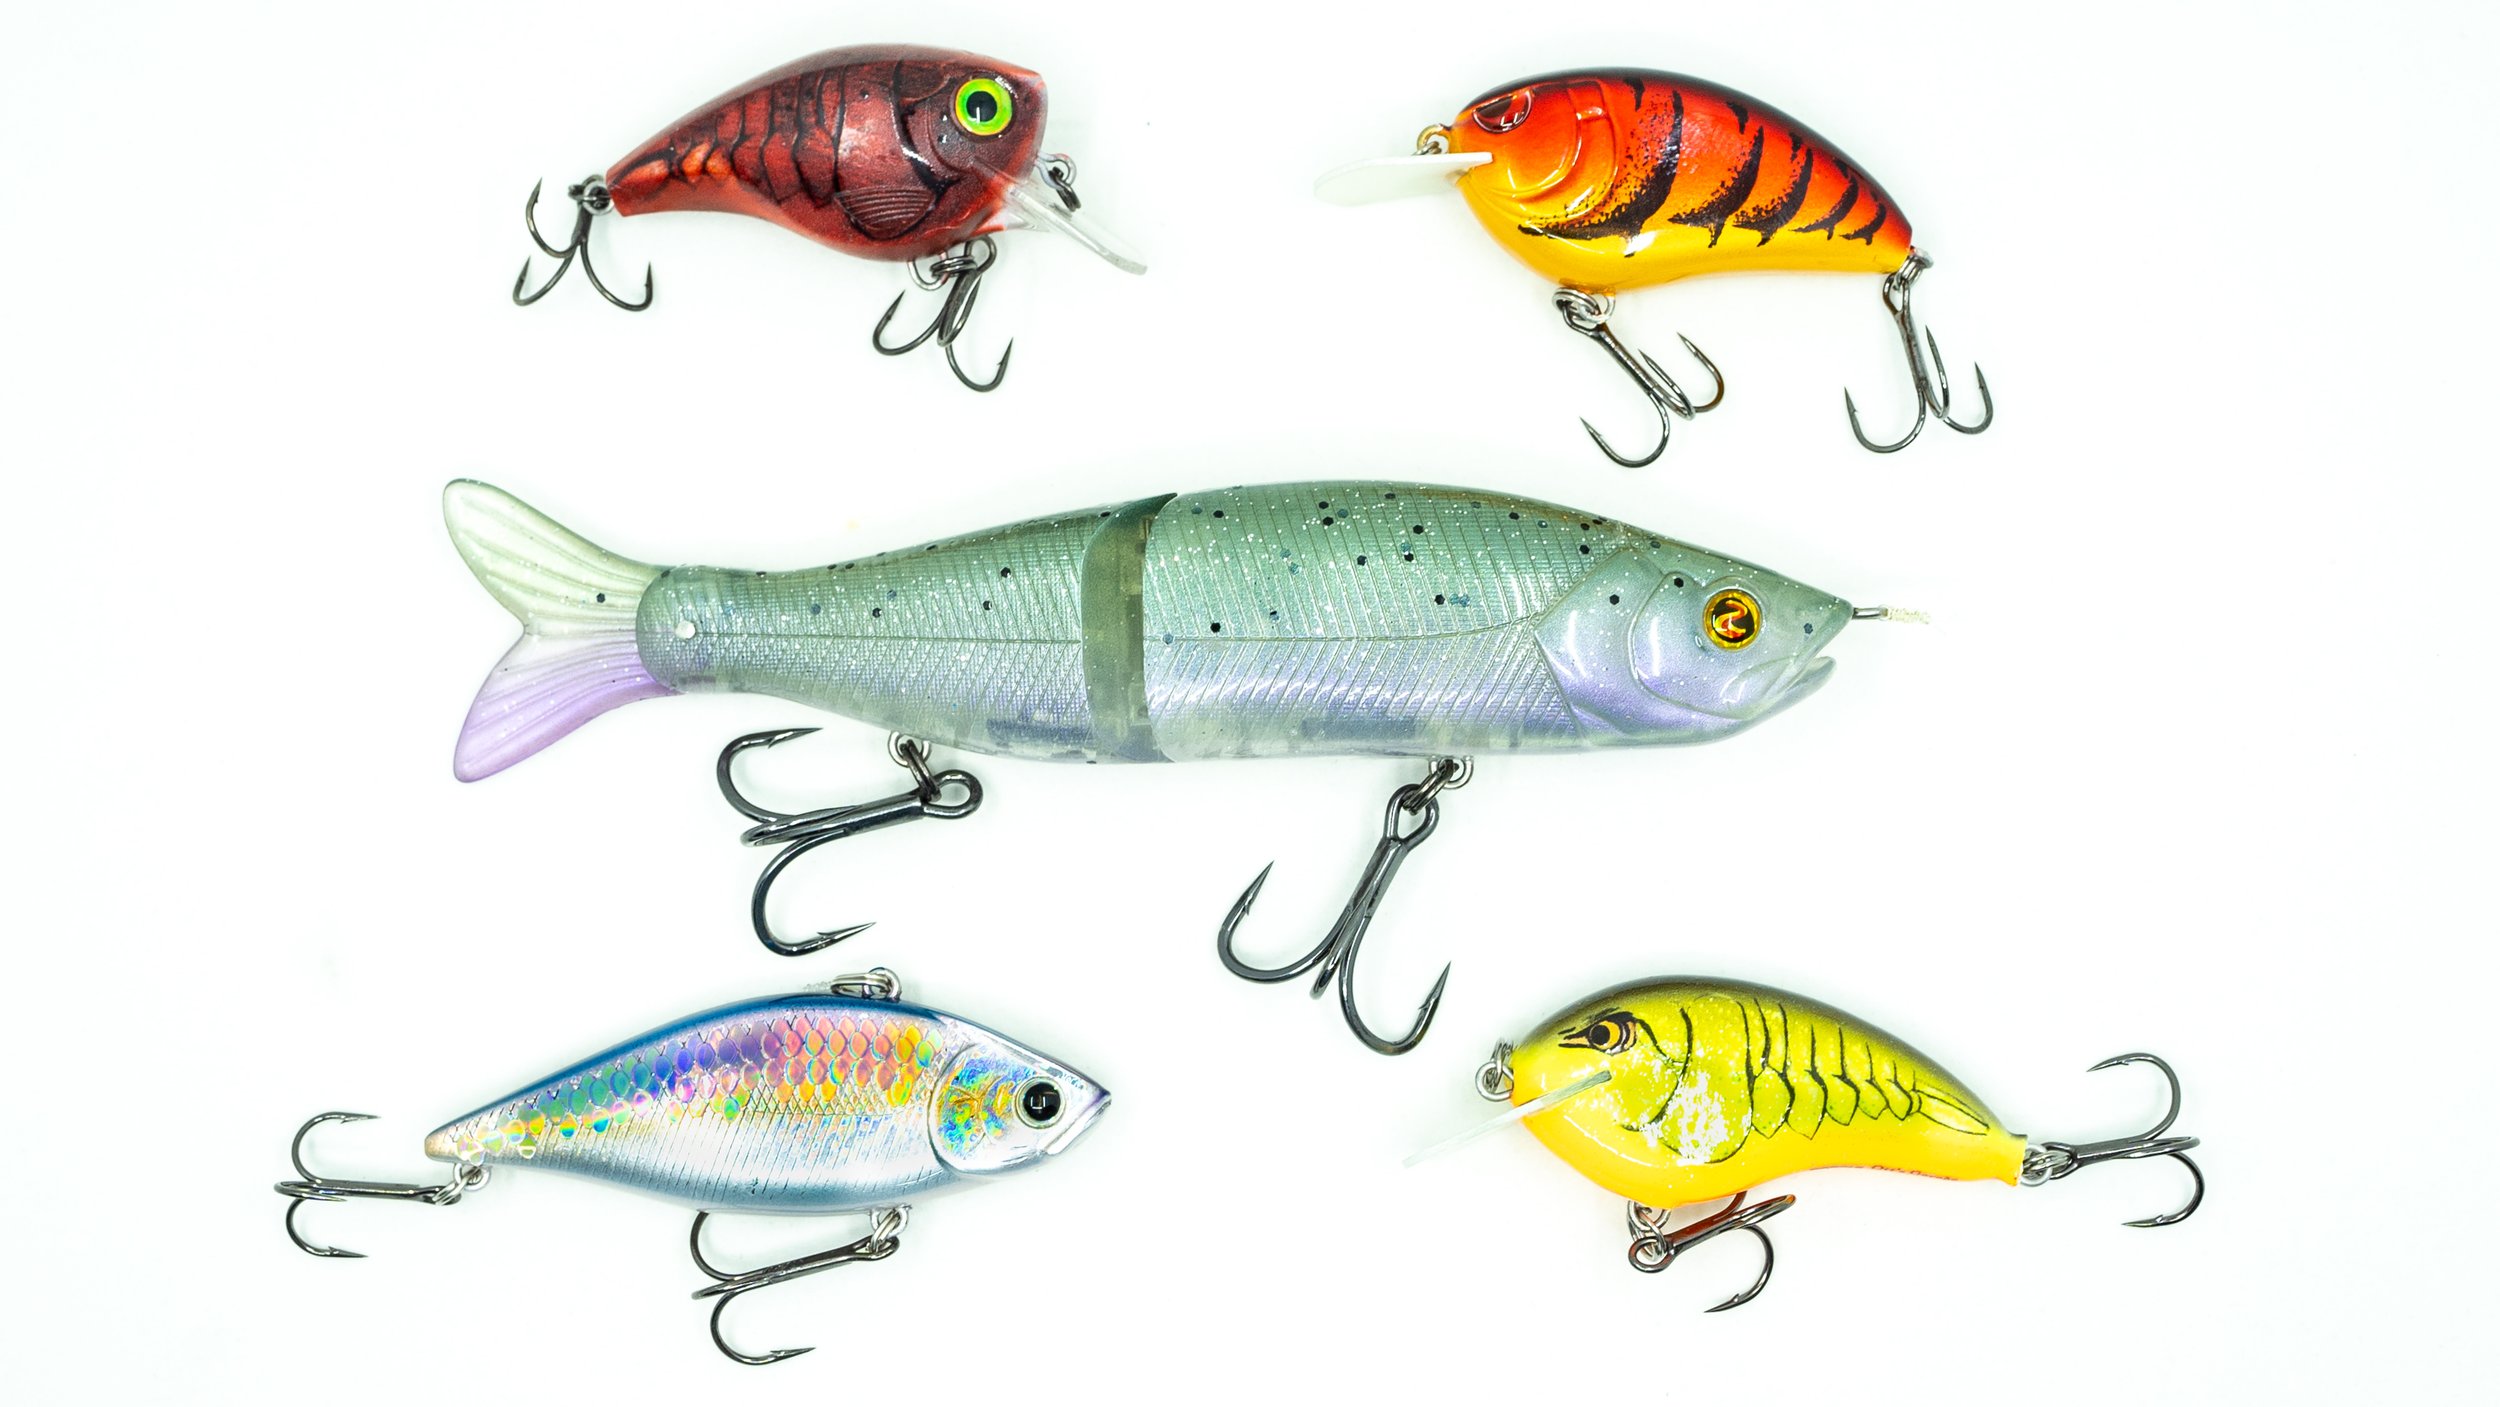 Top 5 Baits For Early Spring Bass Fishing! — Tactical Bassin' - Bass Fishing  Blog